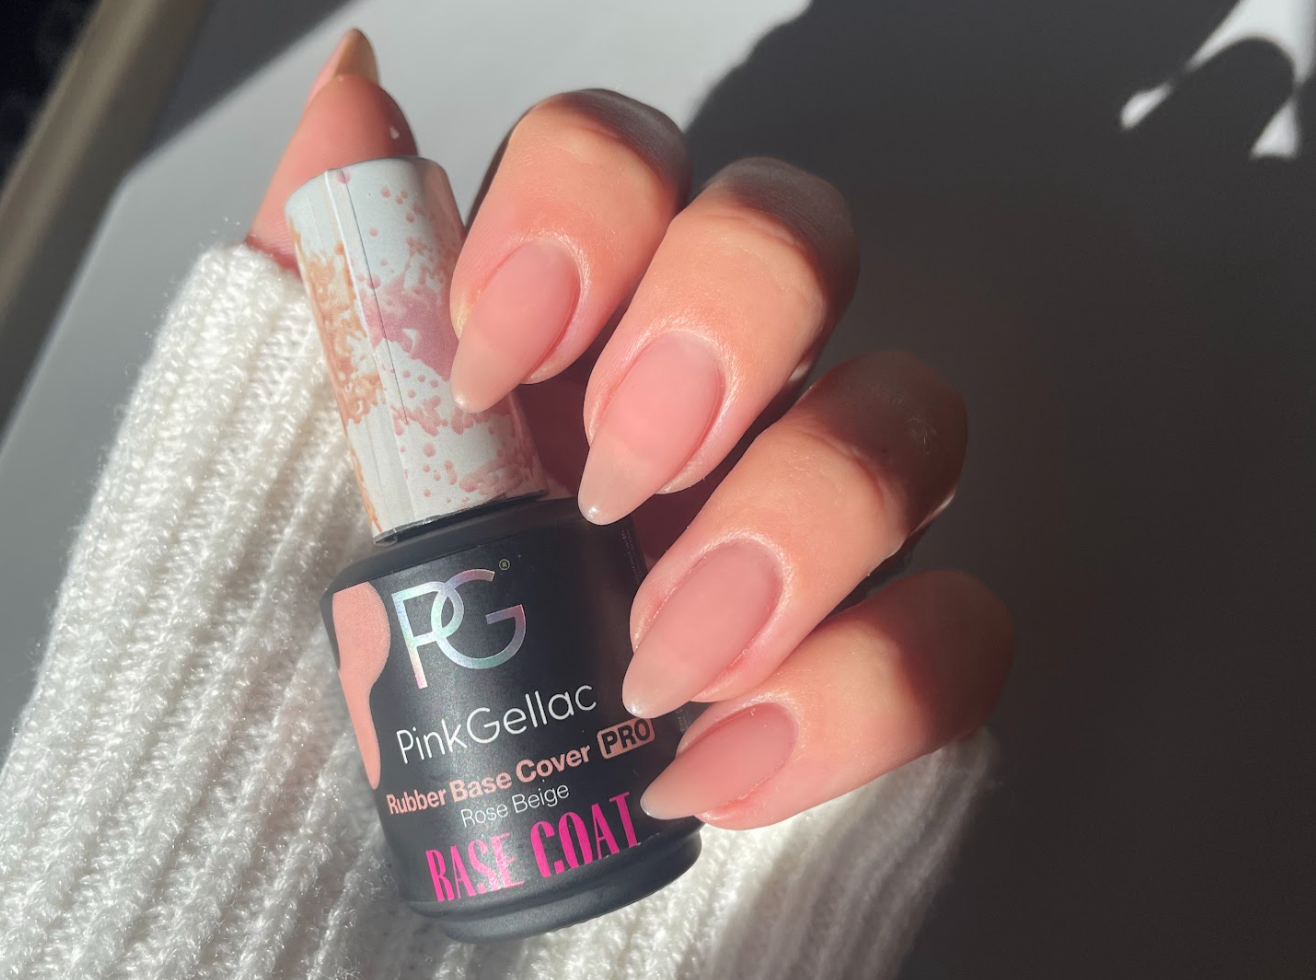 How to enhance your nails with semi-transparant gel polish?